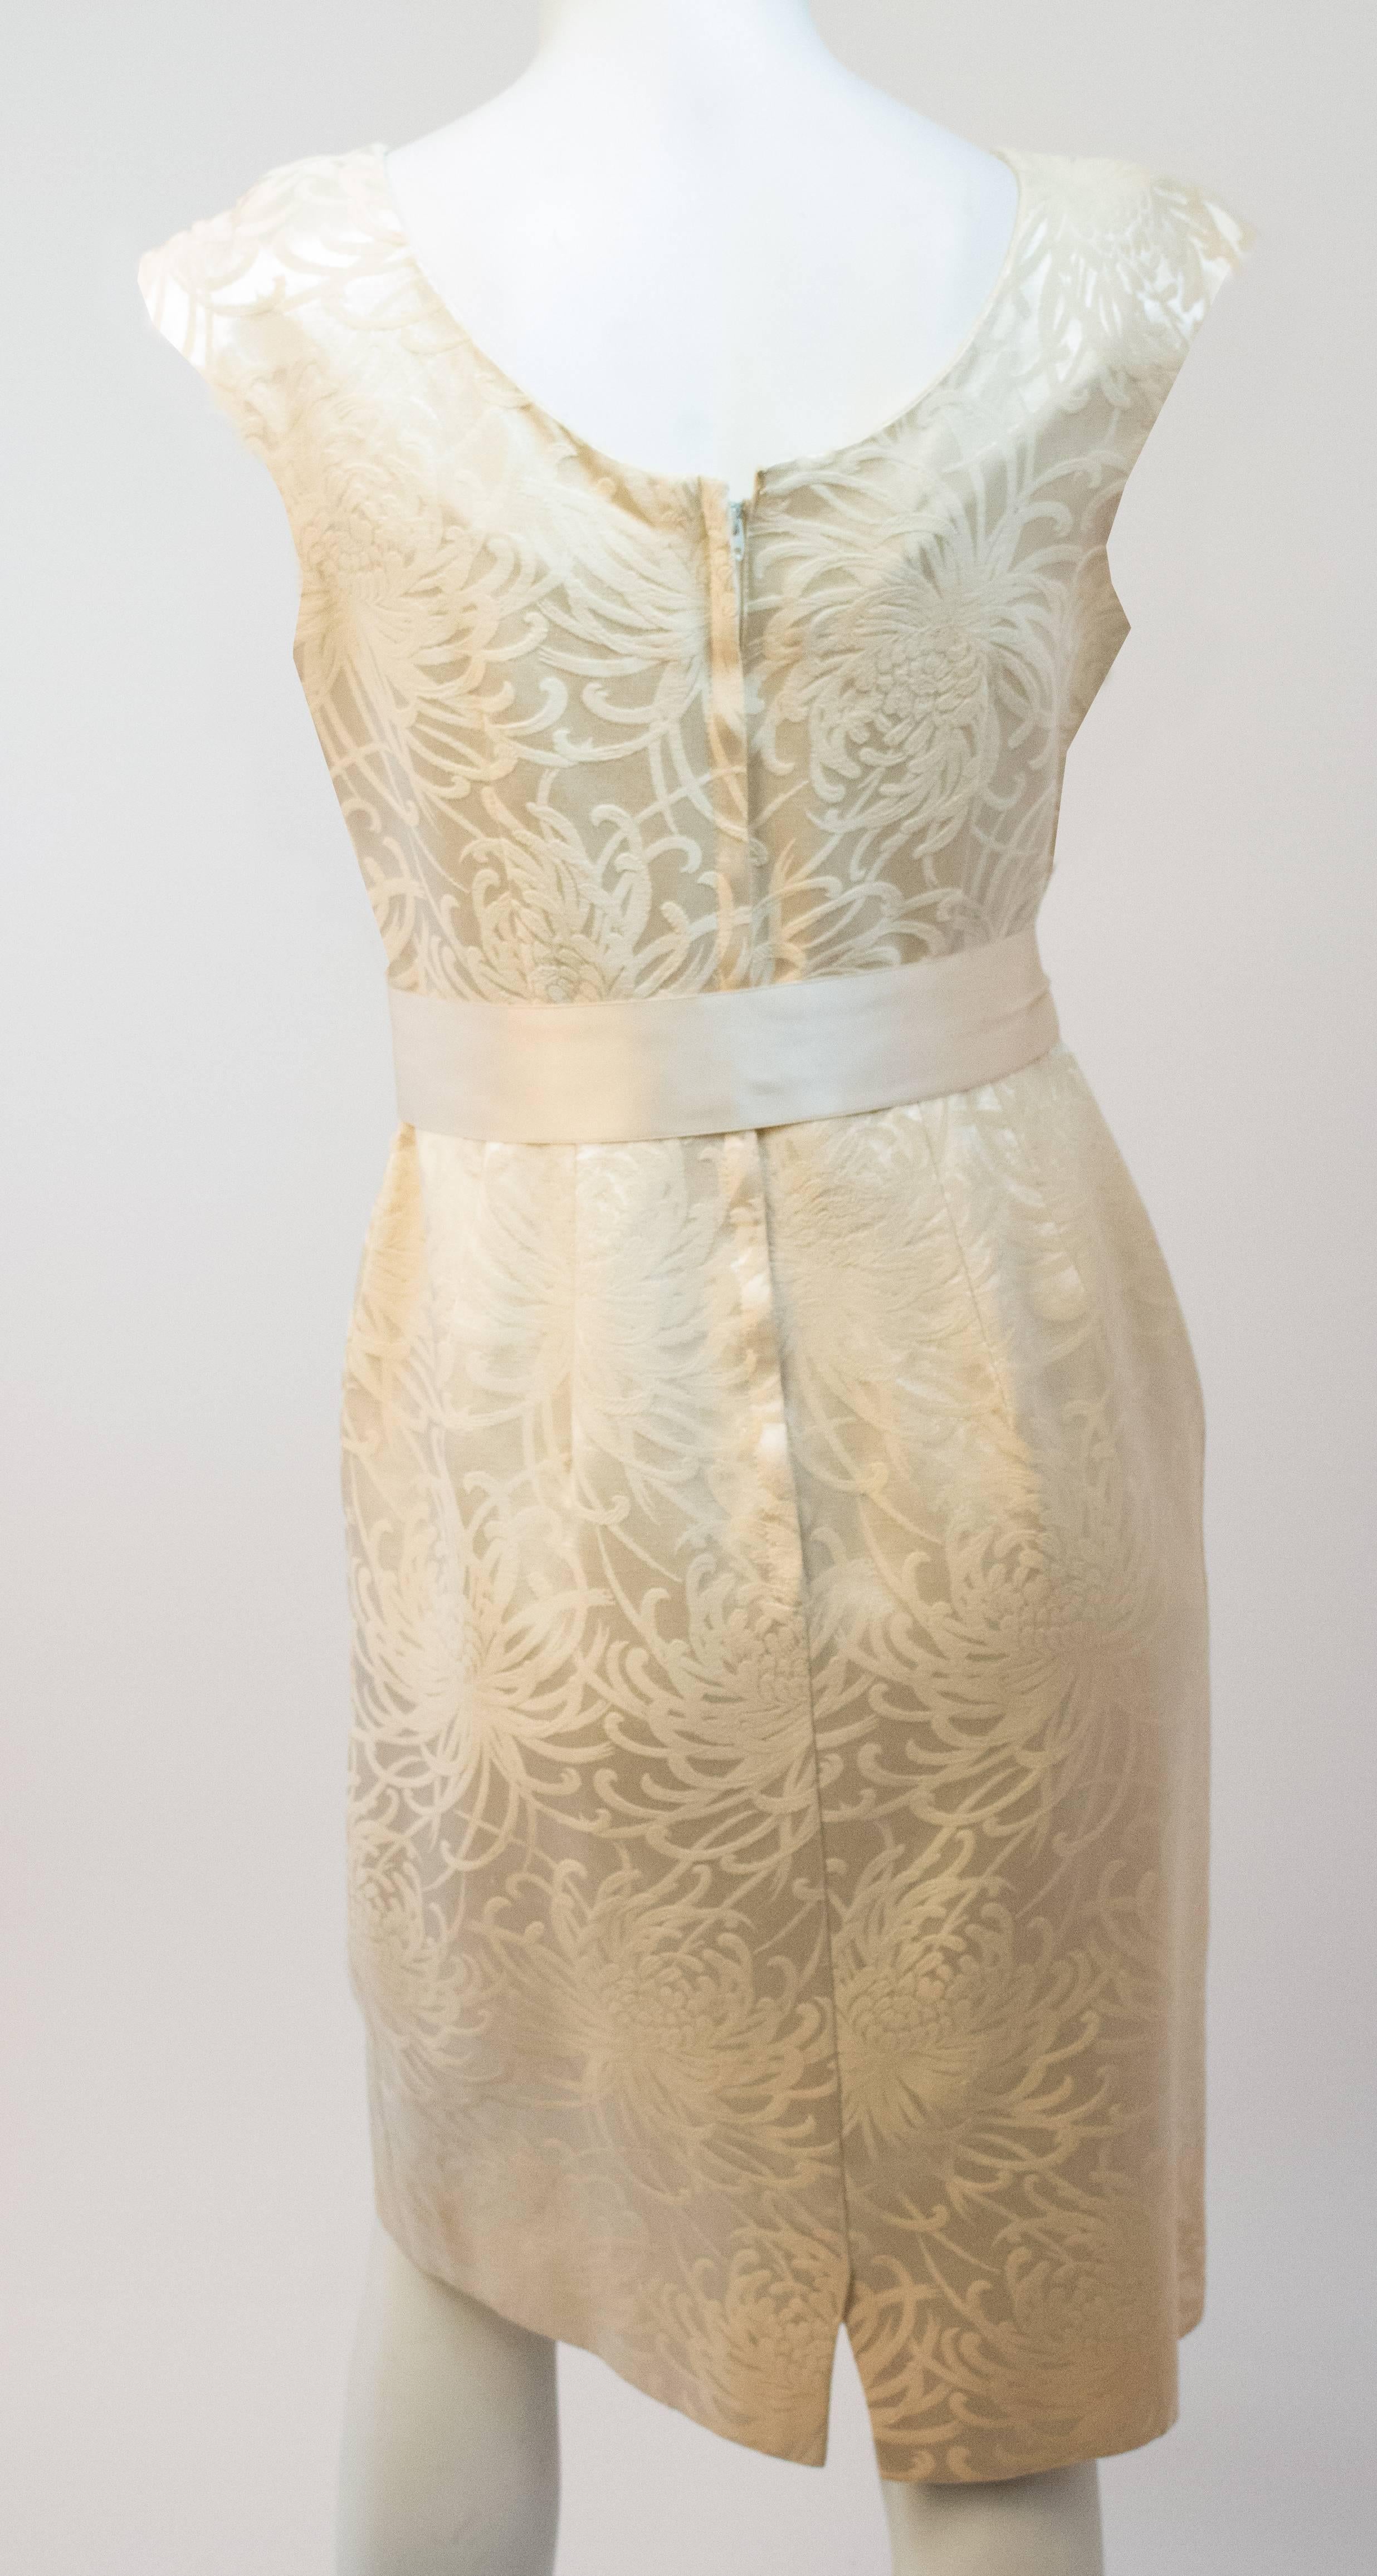 60s Sheath Ivory-toned Dress. This dress has been styled with a sash for photographs but does not come with the dress.